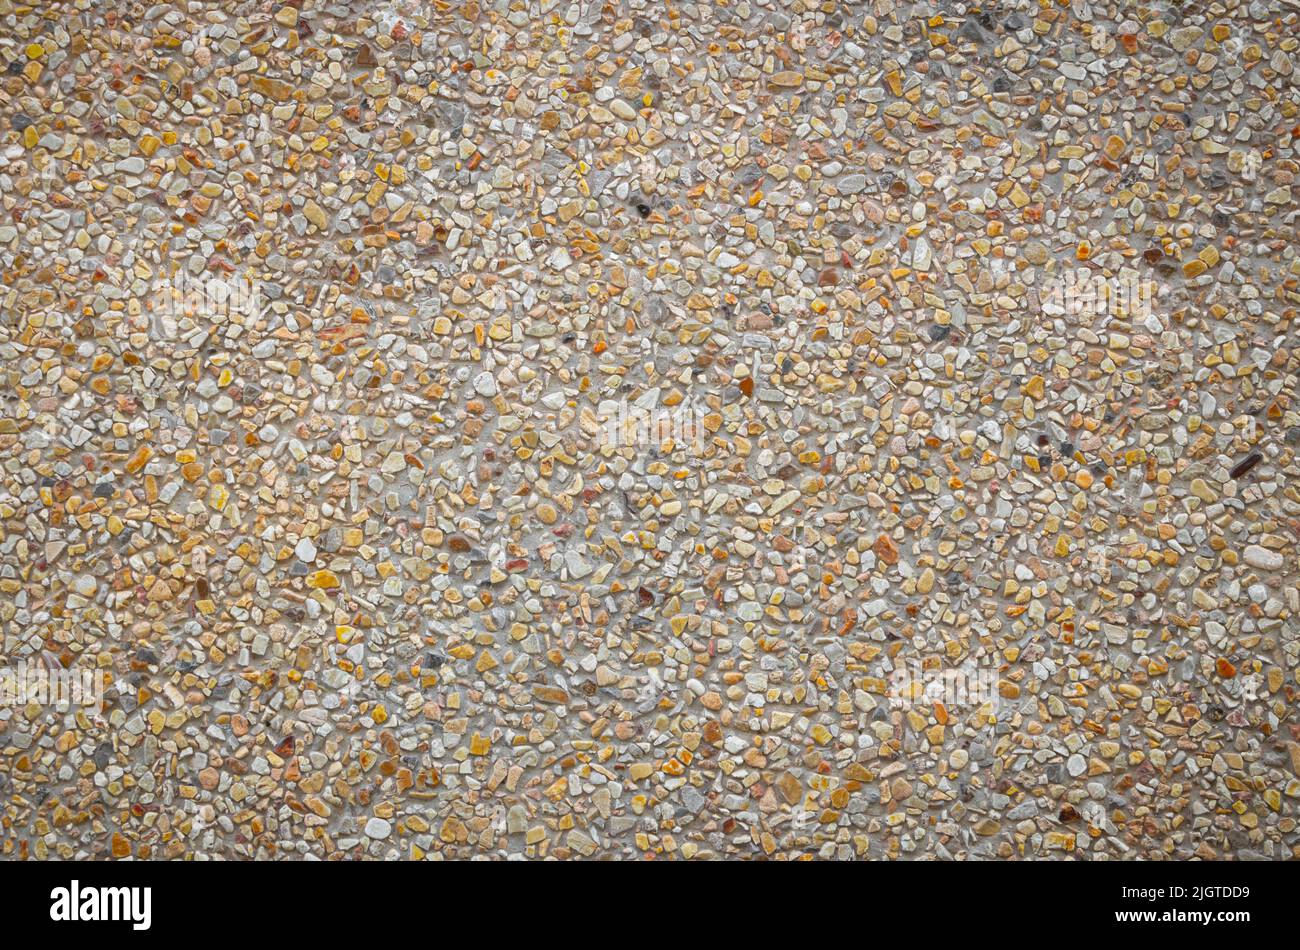 Wash Sandstone or terrazzo flooring pattern and color sorrel surface marble for background image horizontal Stock Photo